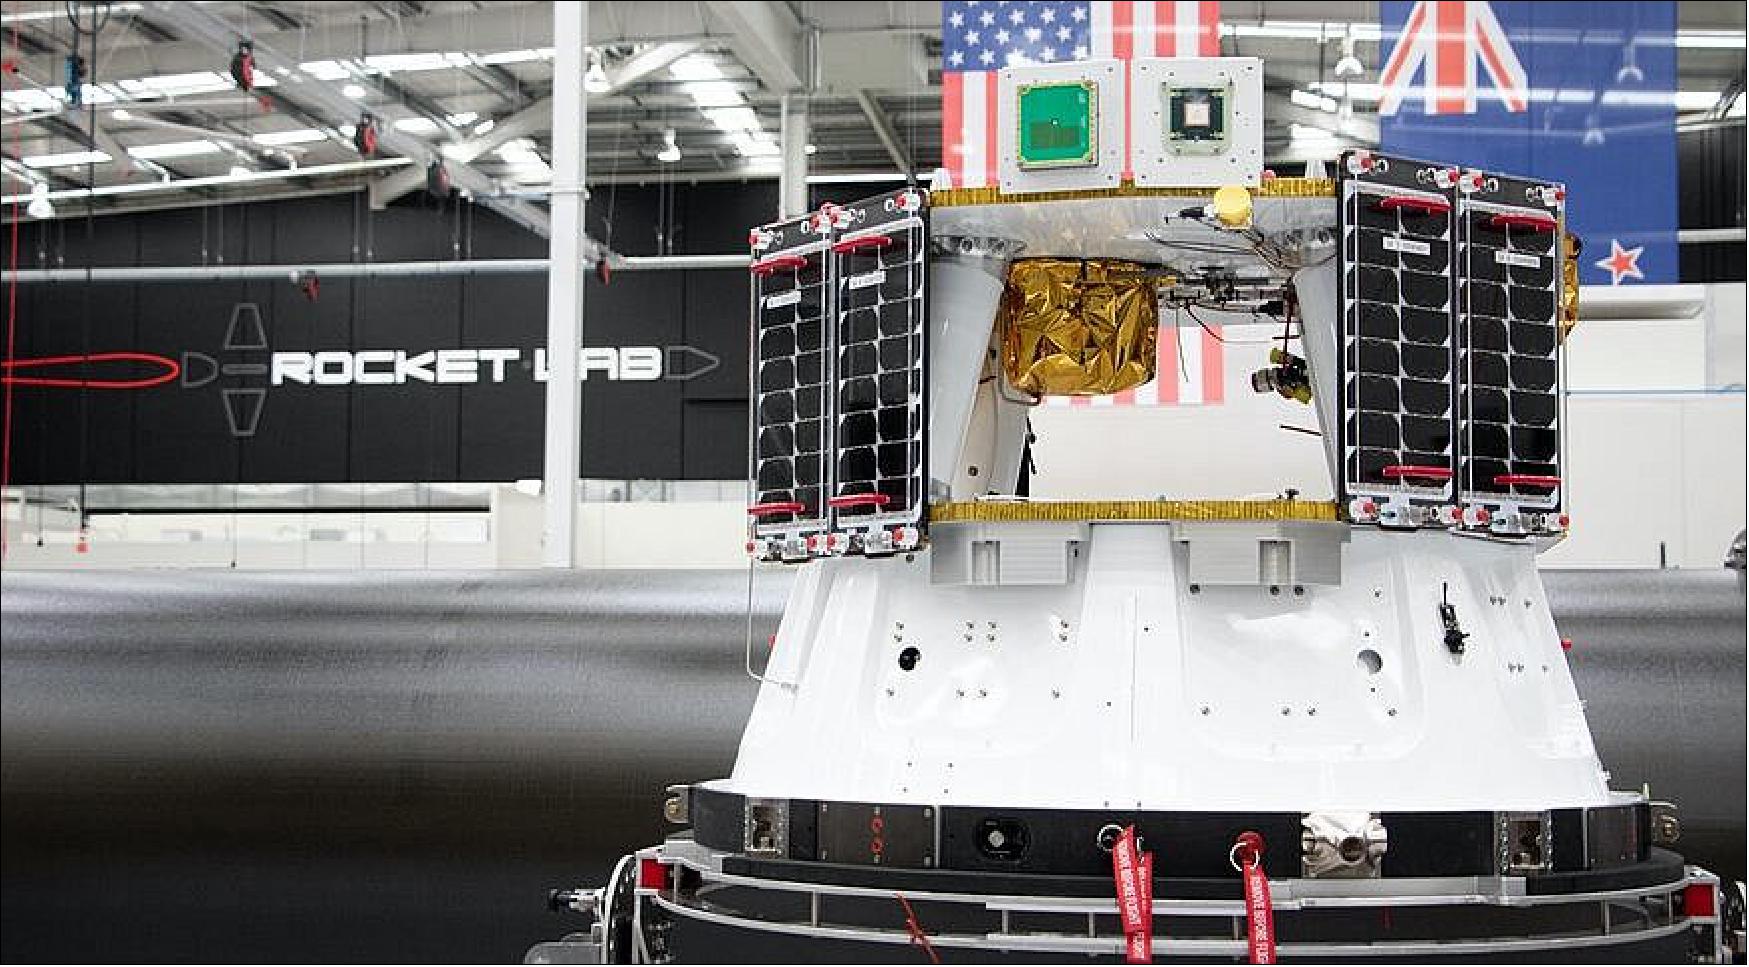 Figure 31: In addition to launching six smallsats, the latest Electron mission includes "Photon Pathstone," a second test of the company's smallsat bus (image credit: Rocket Lab)